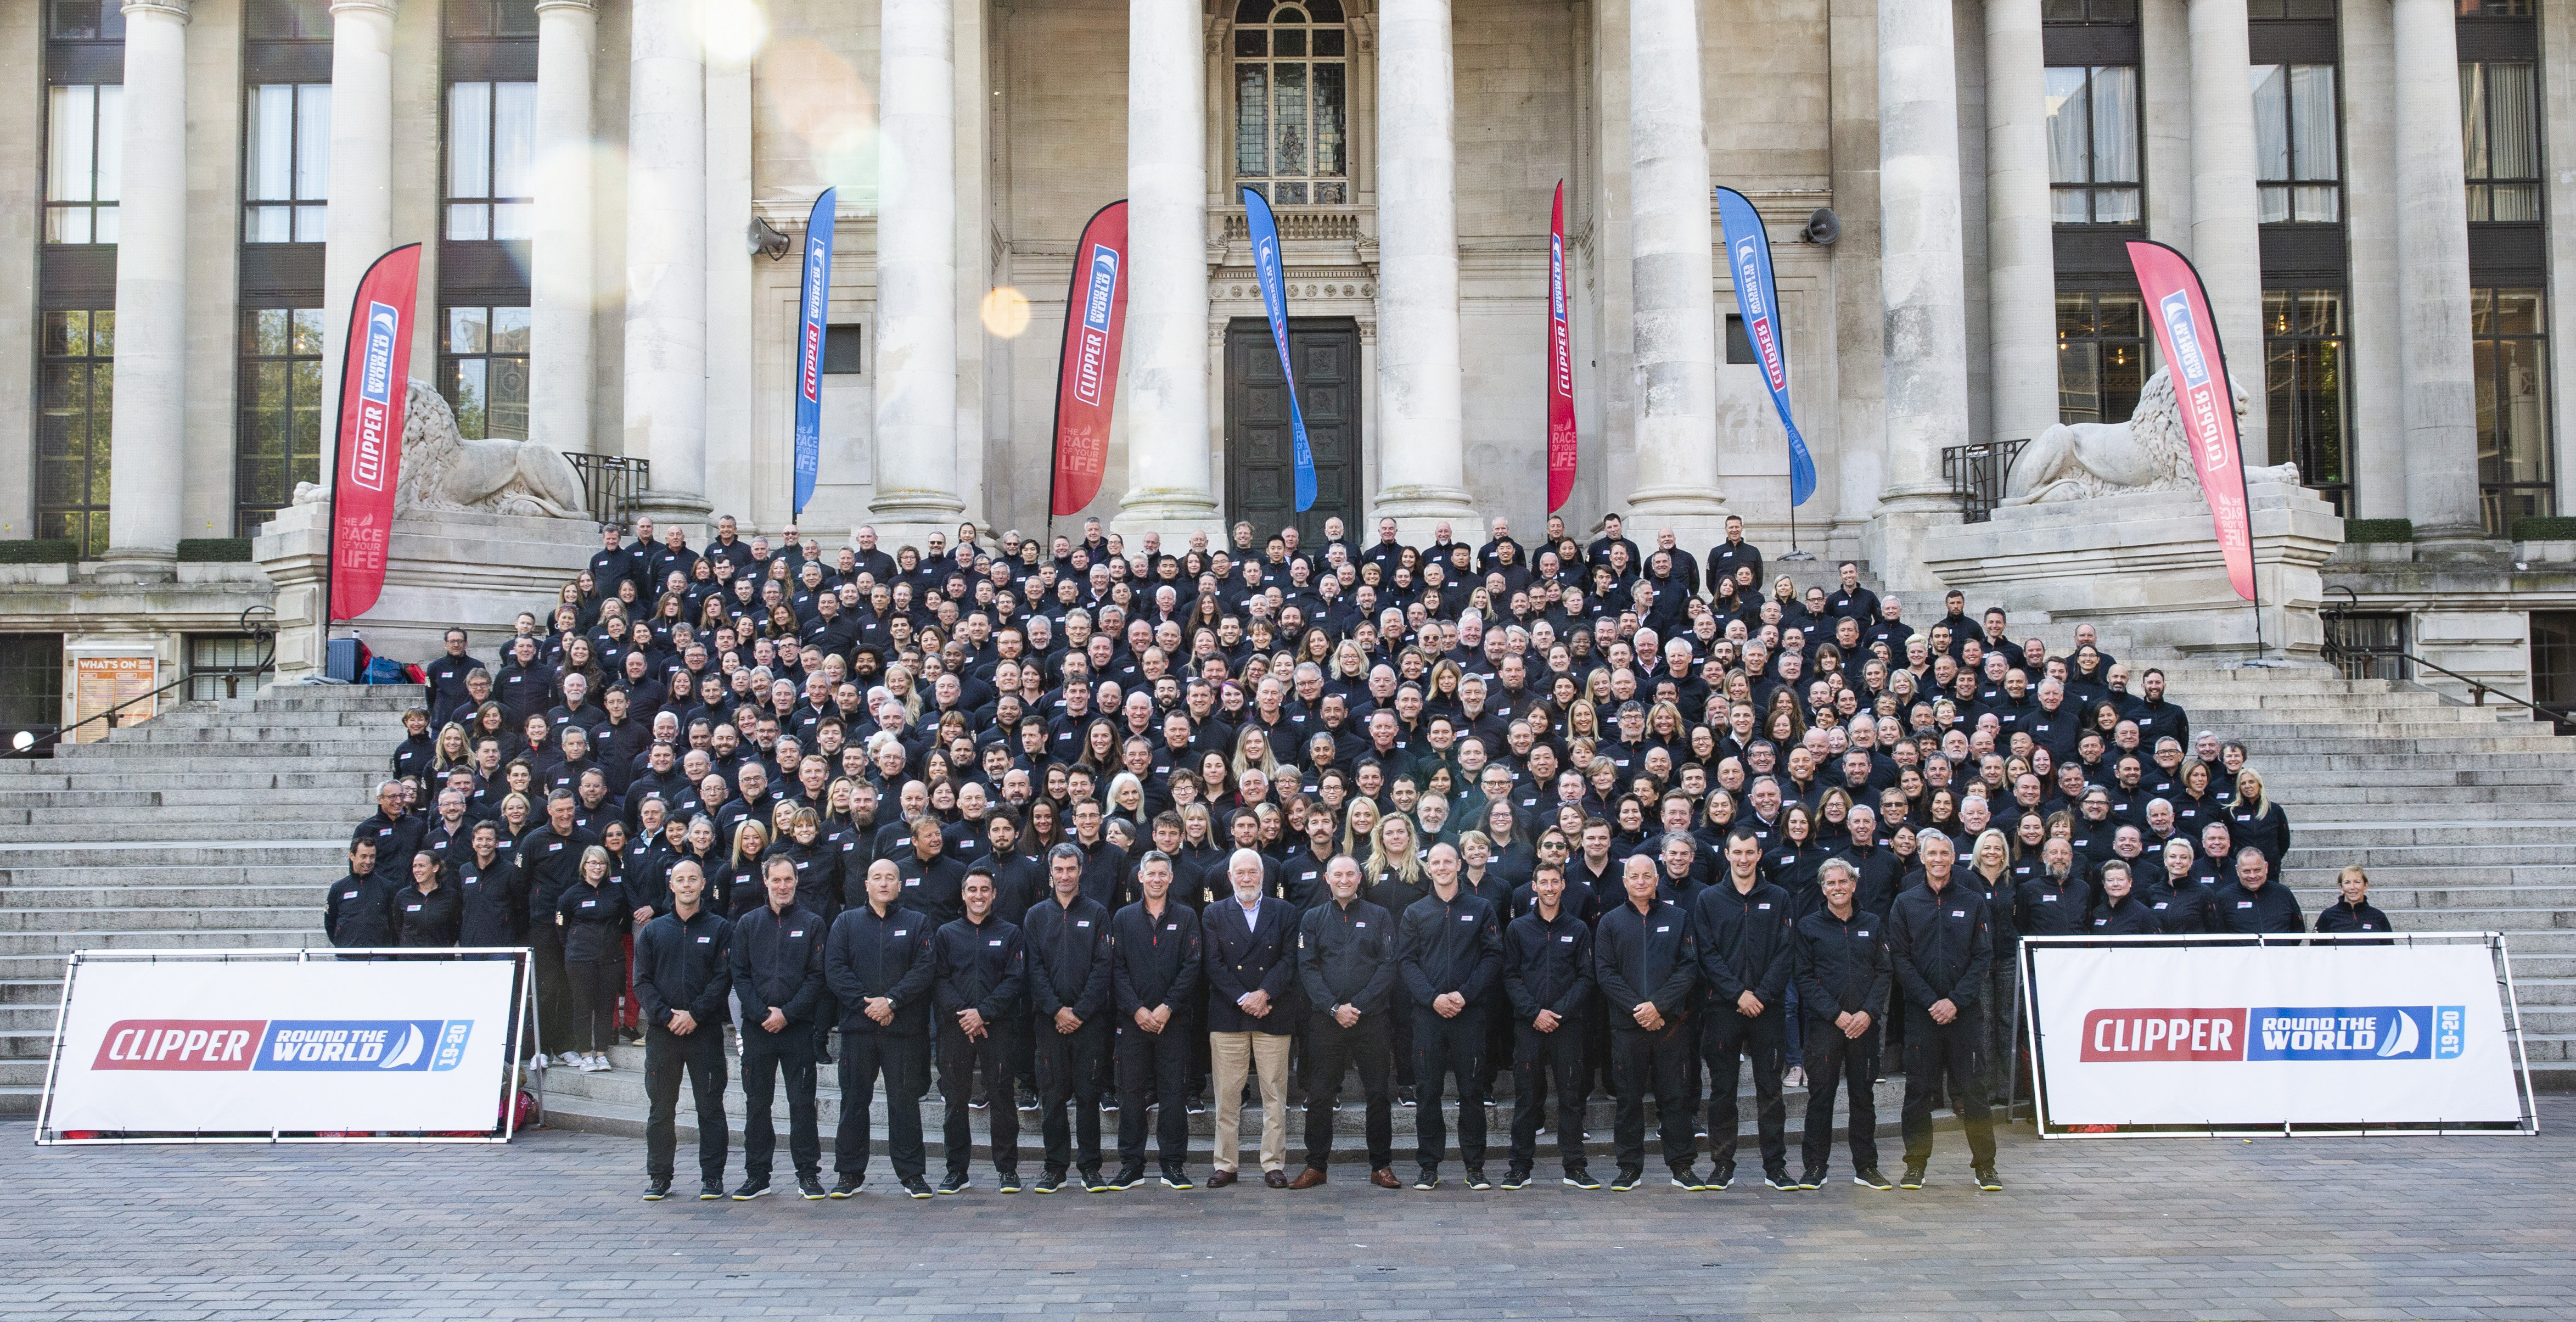 Clipper 2019-20 Race Crew stand on the steps of Portsmouth's Guildhall at last year's Crew Allocation